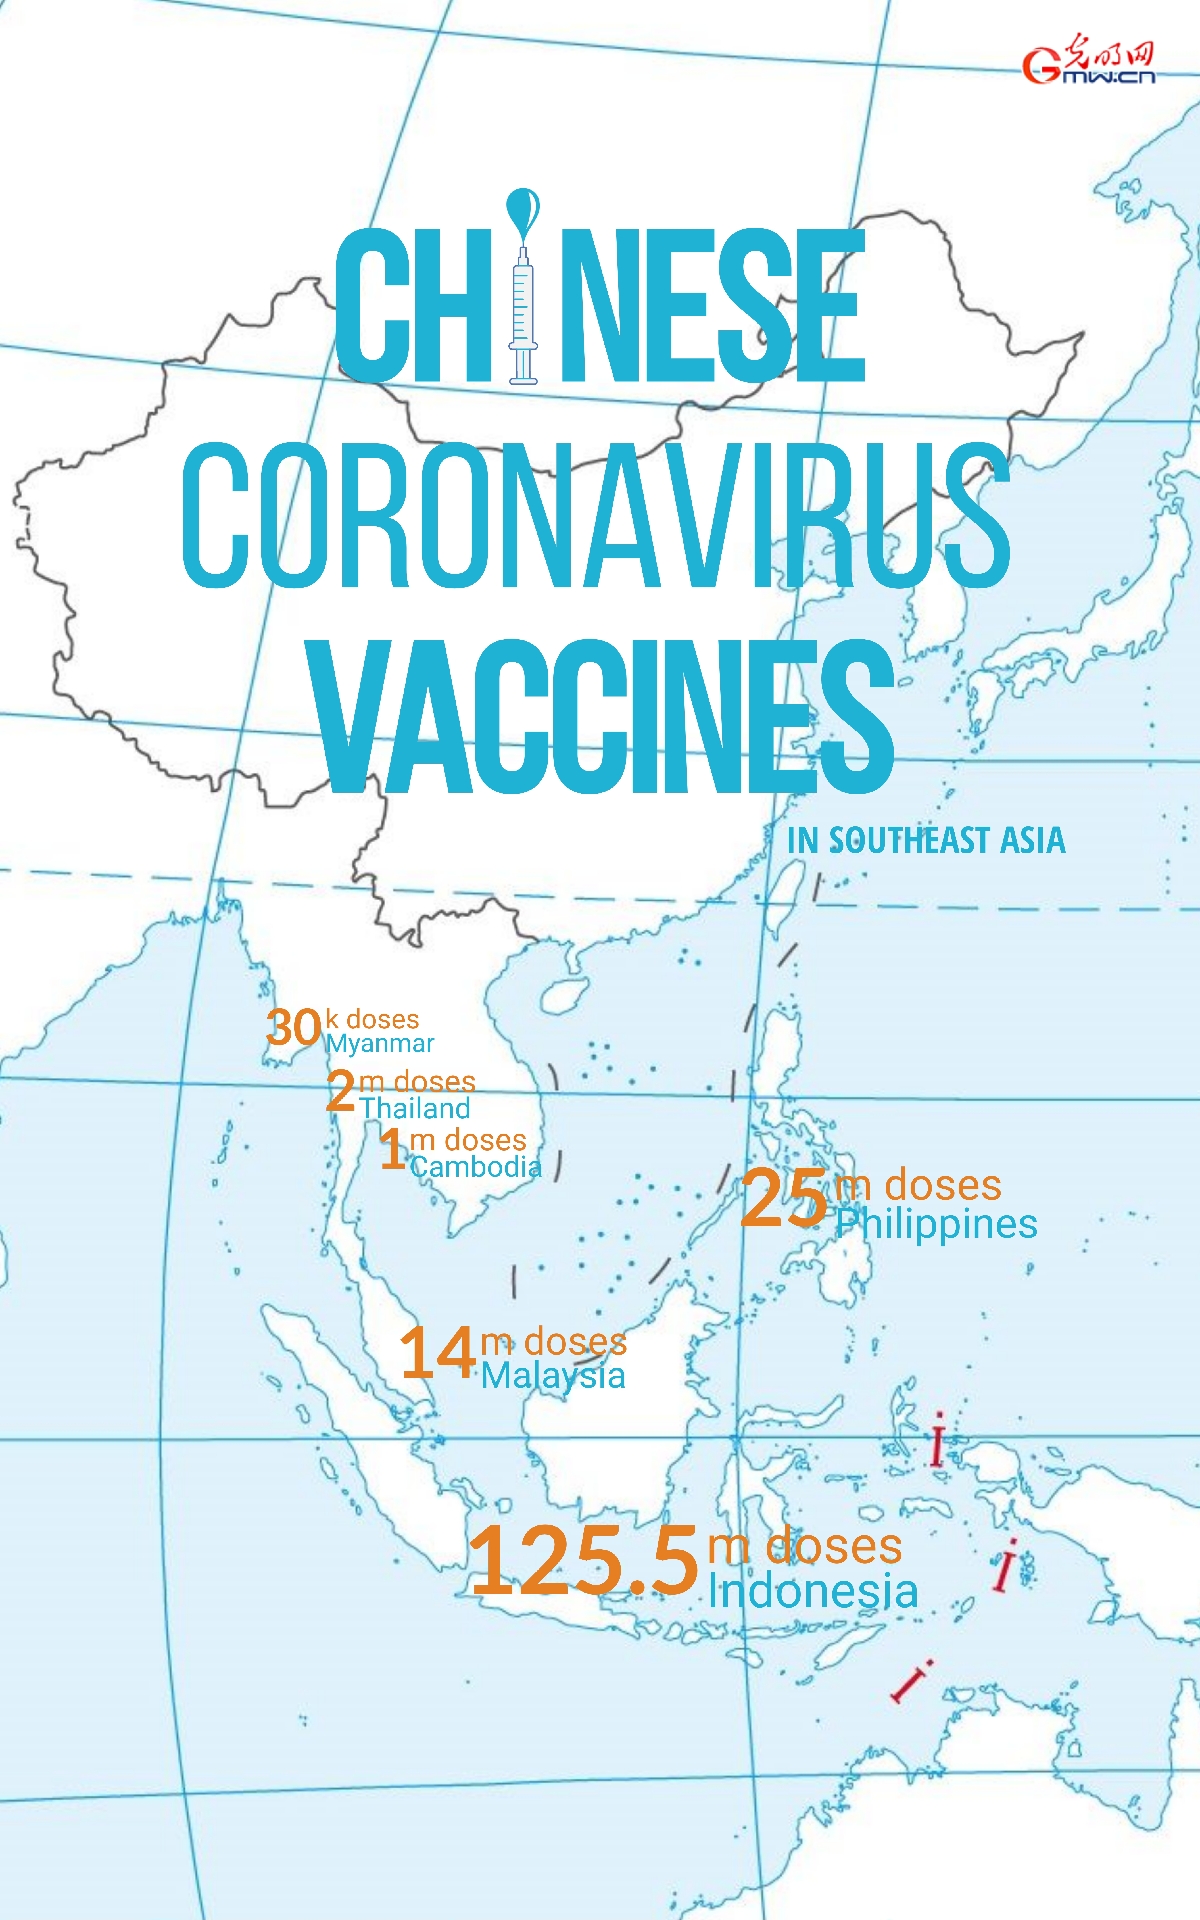 China leads the way with Southeast Asia in Covid-19 vaccine equity